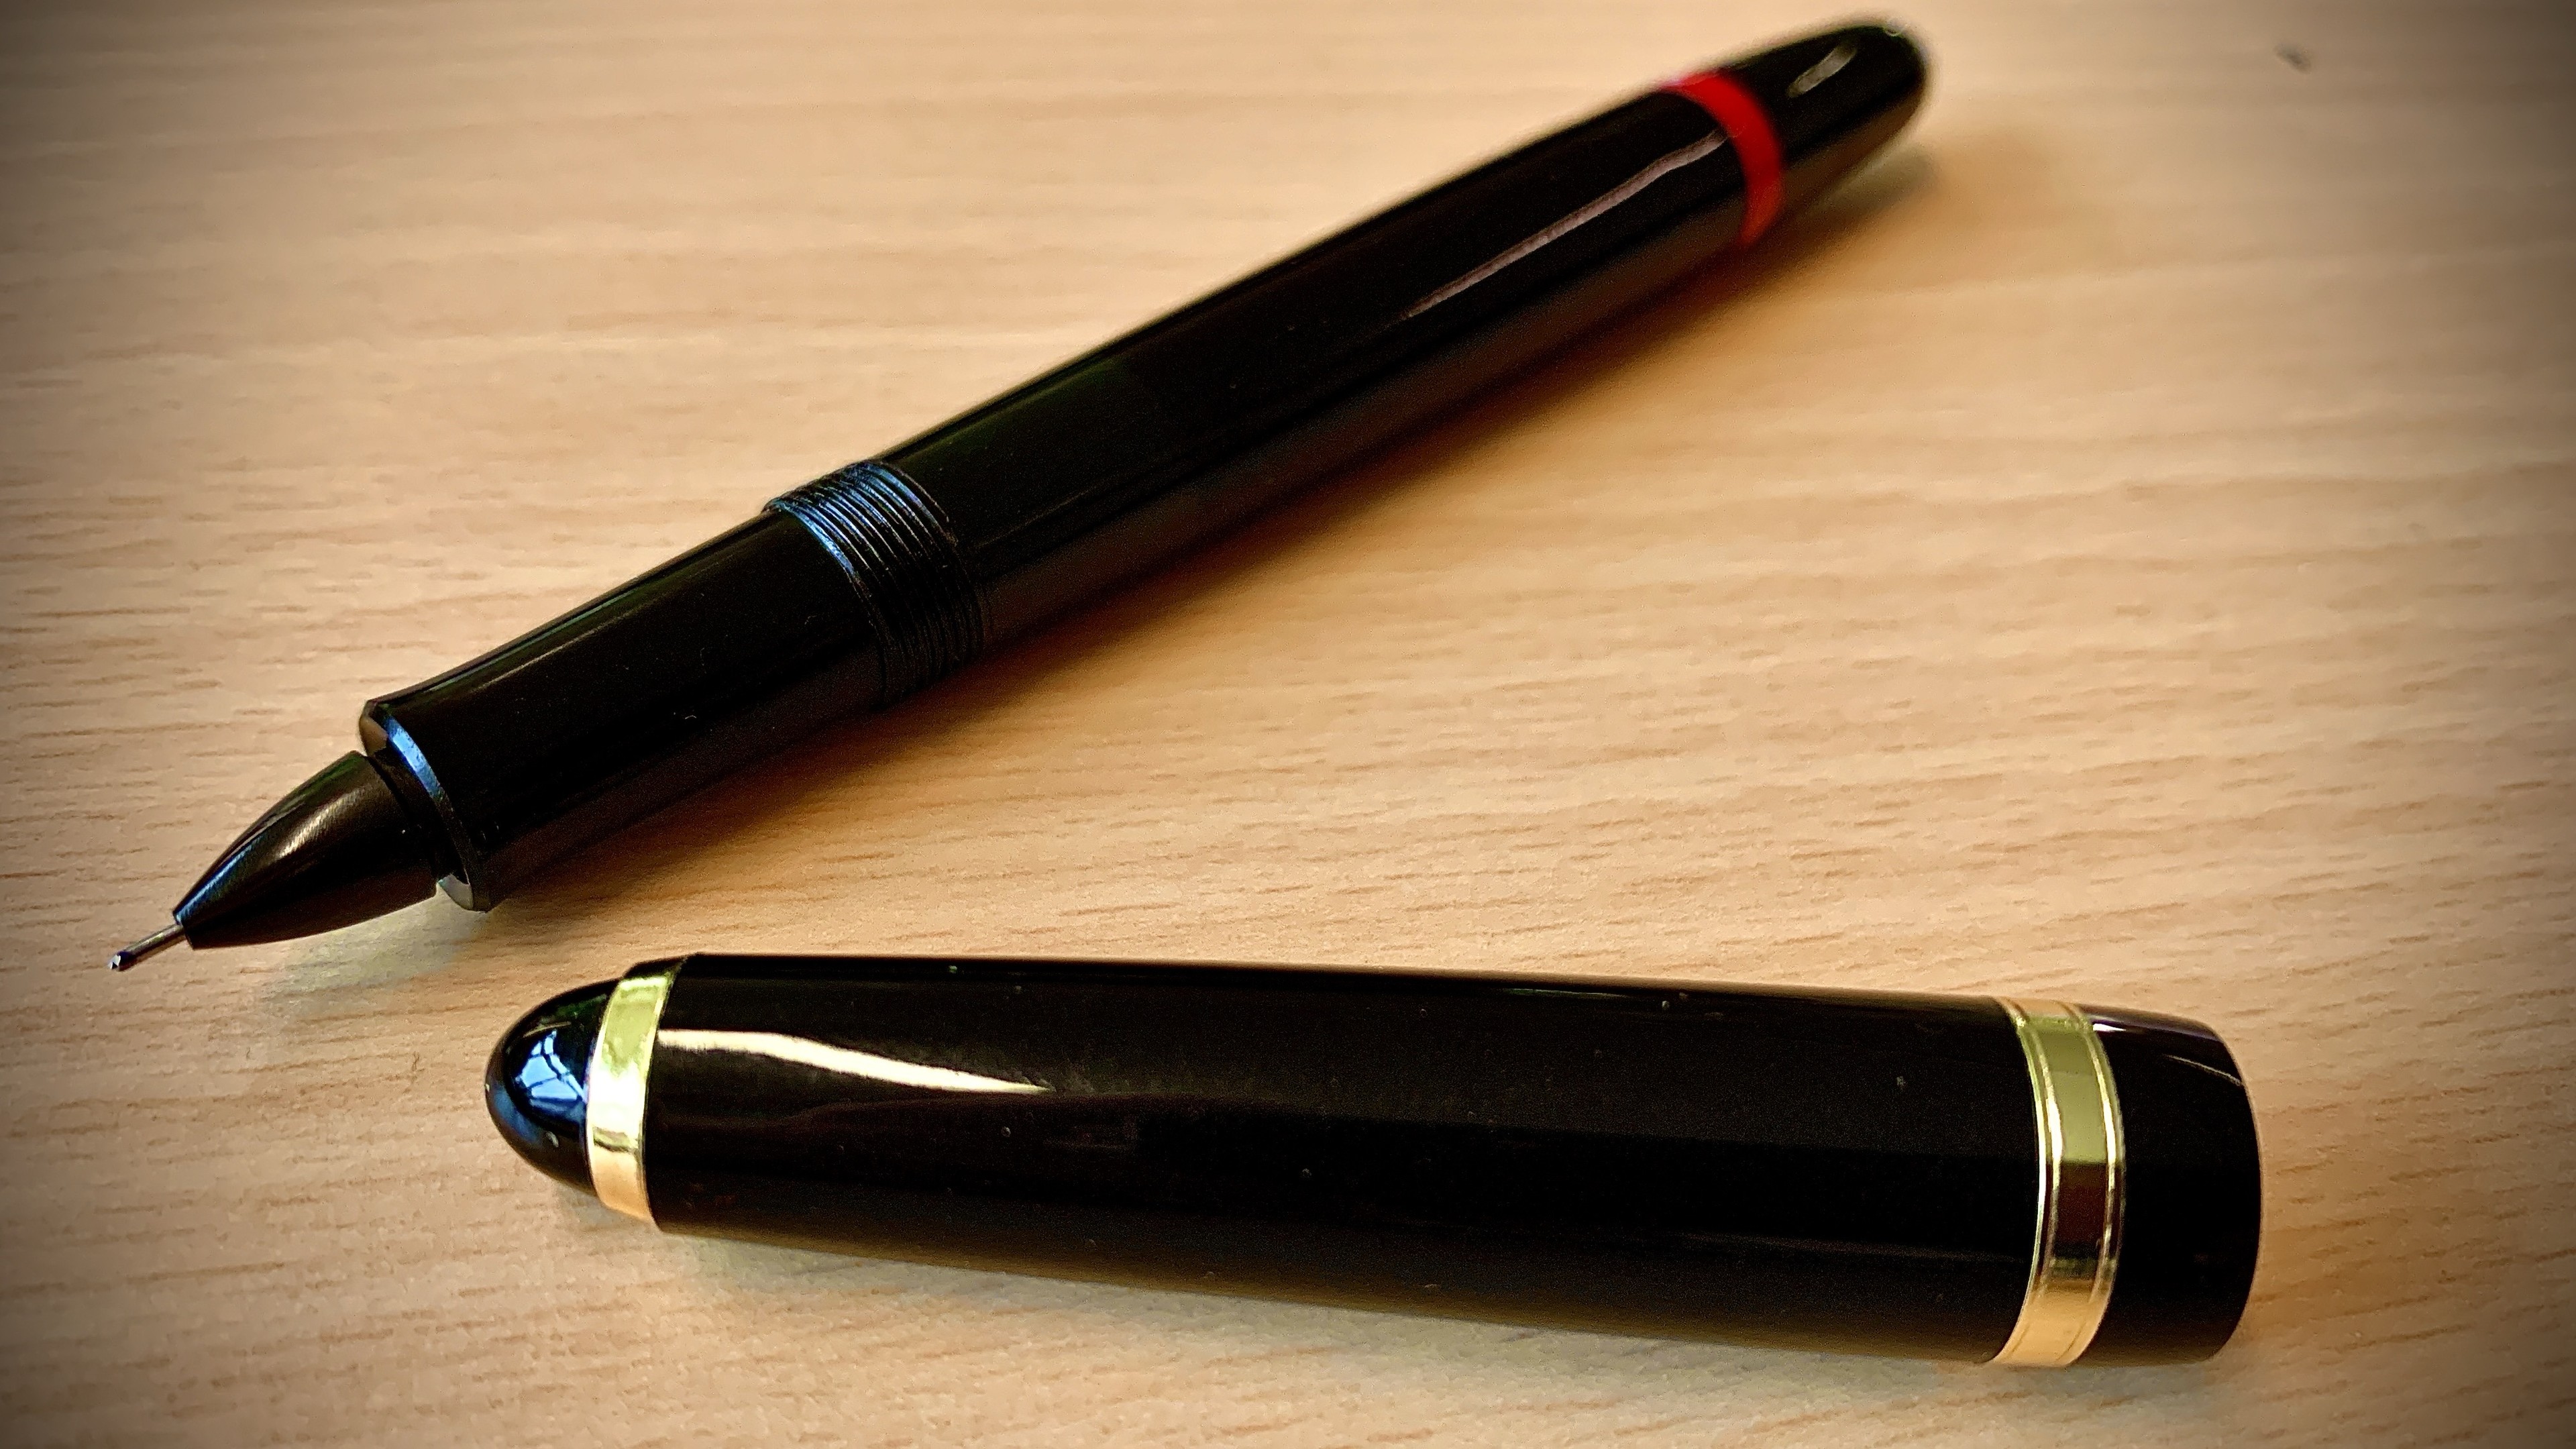 Black fountain pen with its cap placed beside it on a wooden surface.